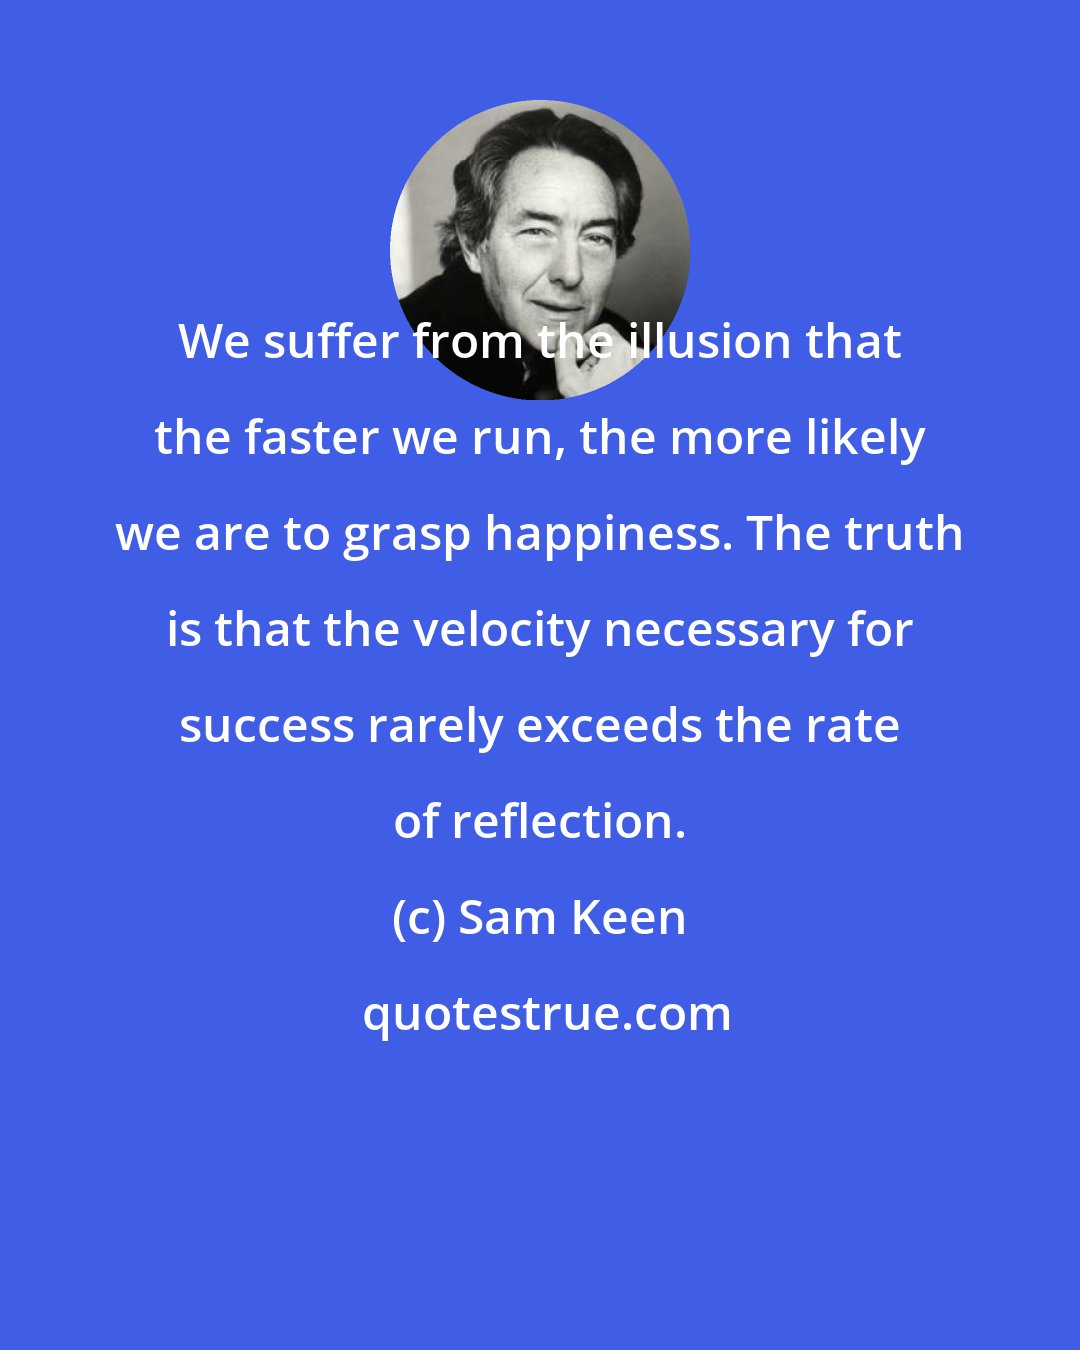 Sam Keen: We suffer from the illusion that the faster we run, the more likely we are to grasp happiness. The truth is that the velocity necessary for success rarely exceeds the rate of reflection.